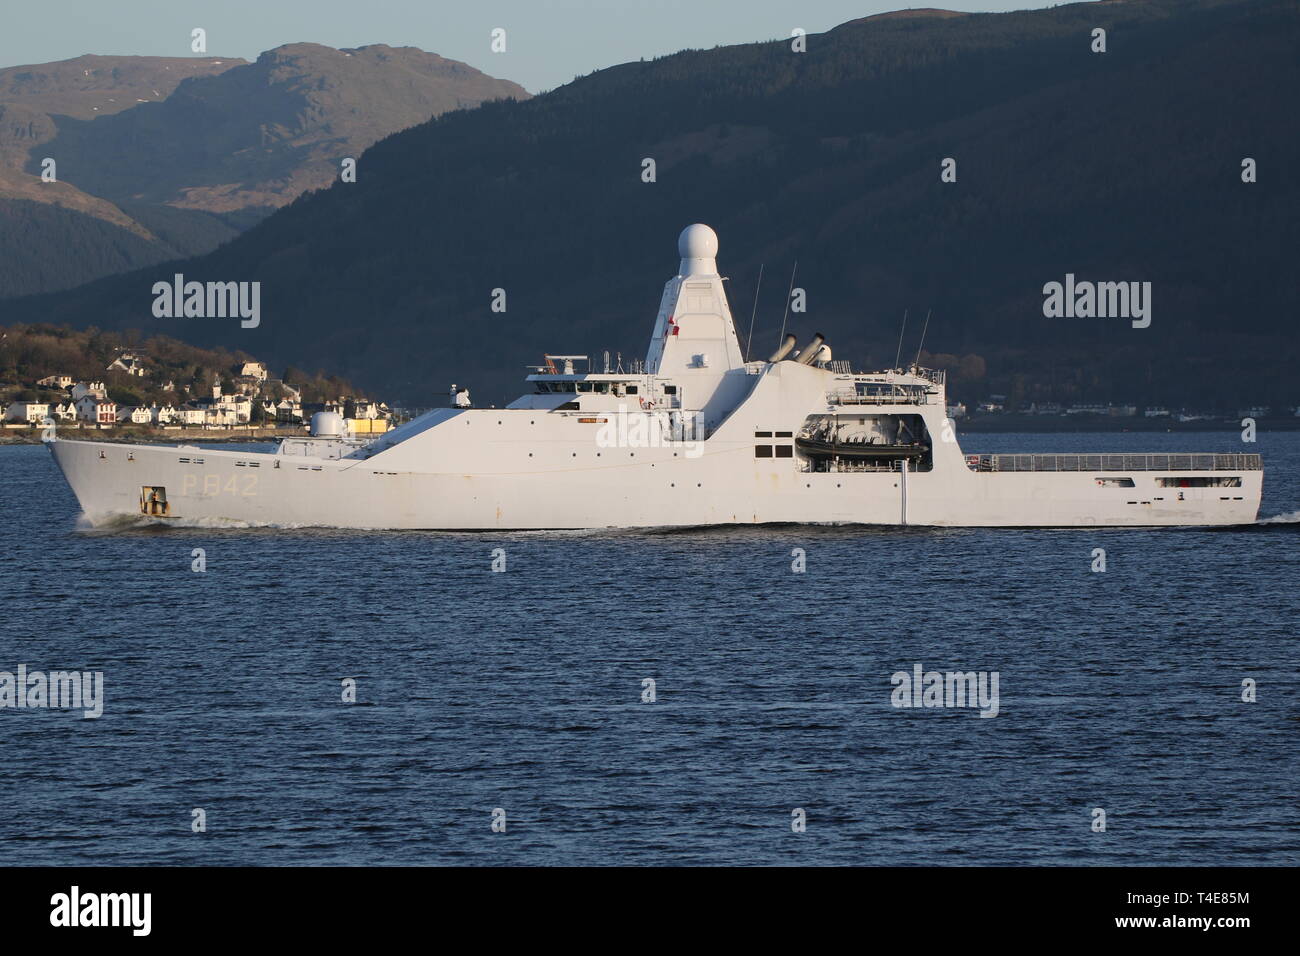 HNLMS Friesland (P842), a Holland-class patrol vessel operated by the Royal Netherlands Navy, passing Gourock during Exercise Joint Warrior 19-1. Stock Photo